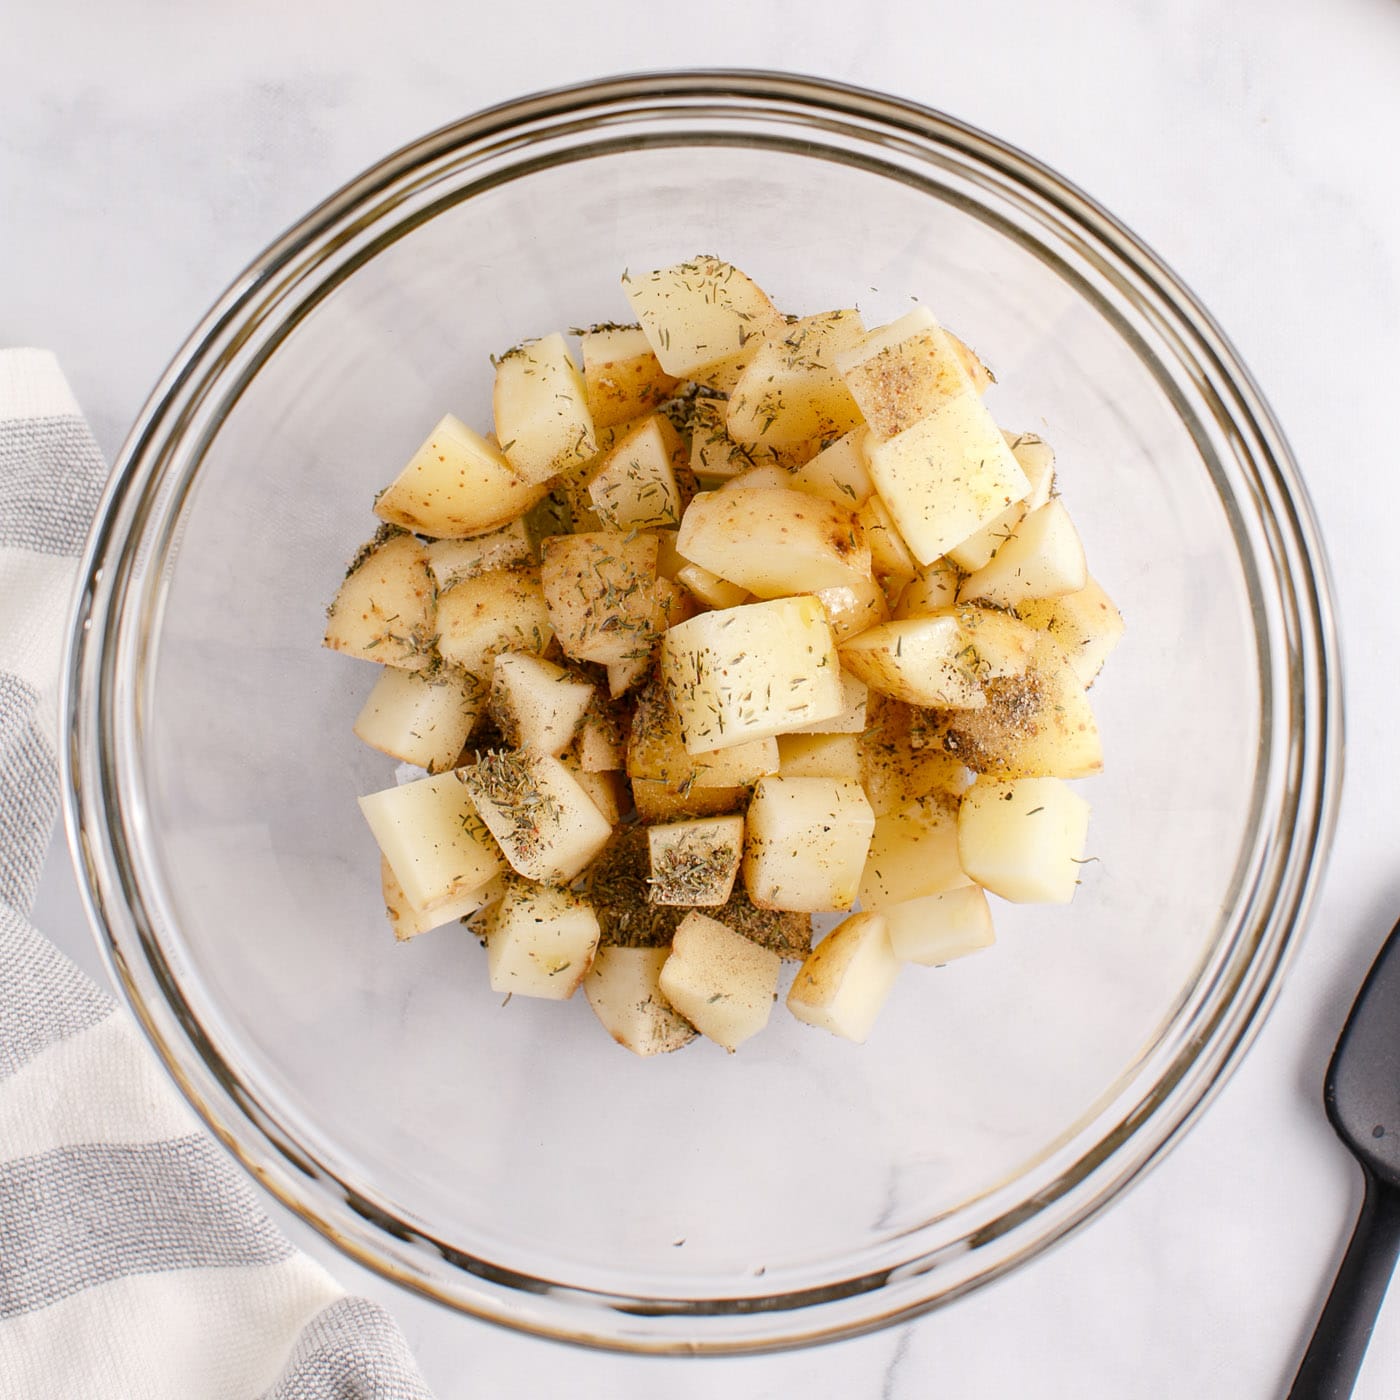 cubed potatoes in a bowl with seasonings and oil